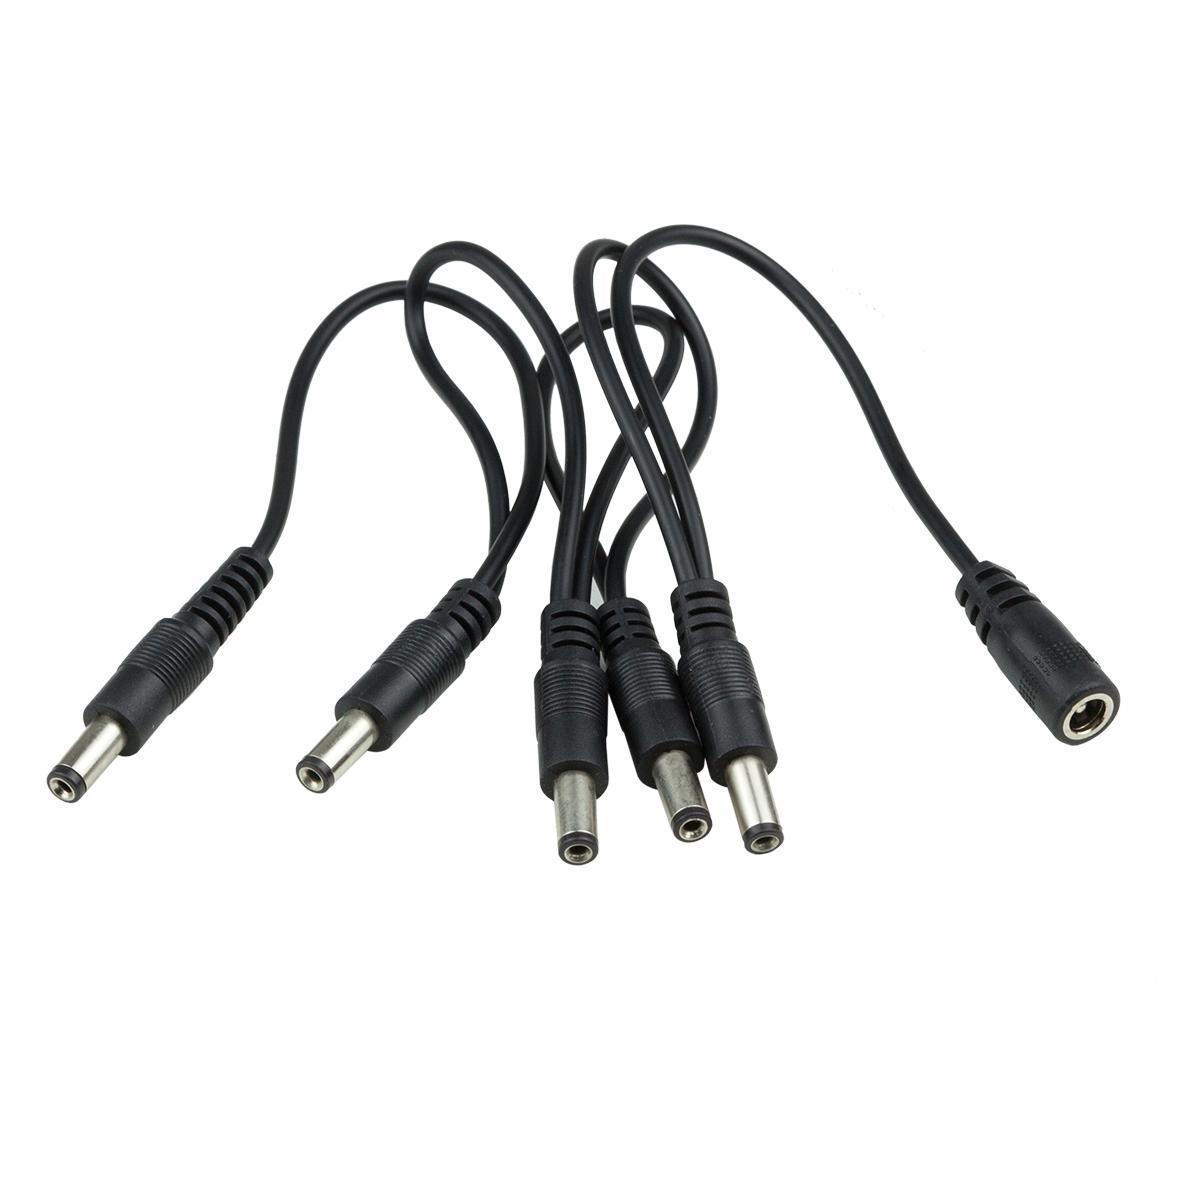 Proline EXCS-5 Guitar Effects Pedal Daisy Chain Cable - Recomusic